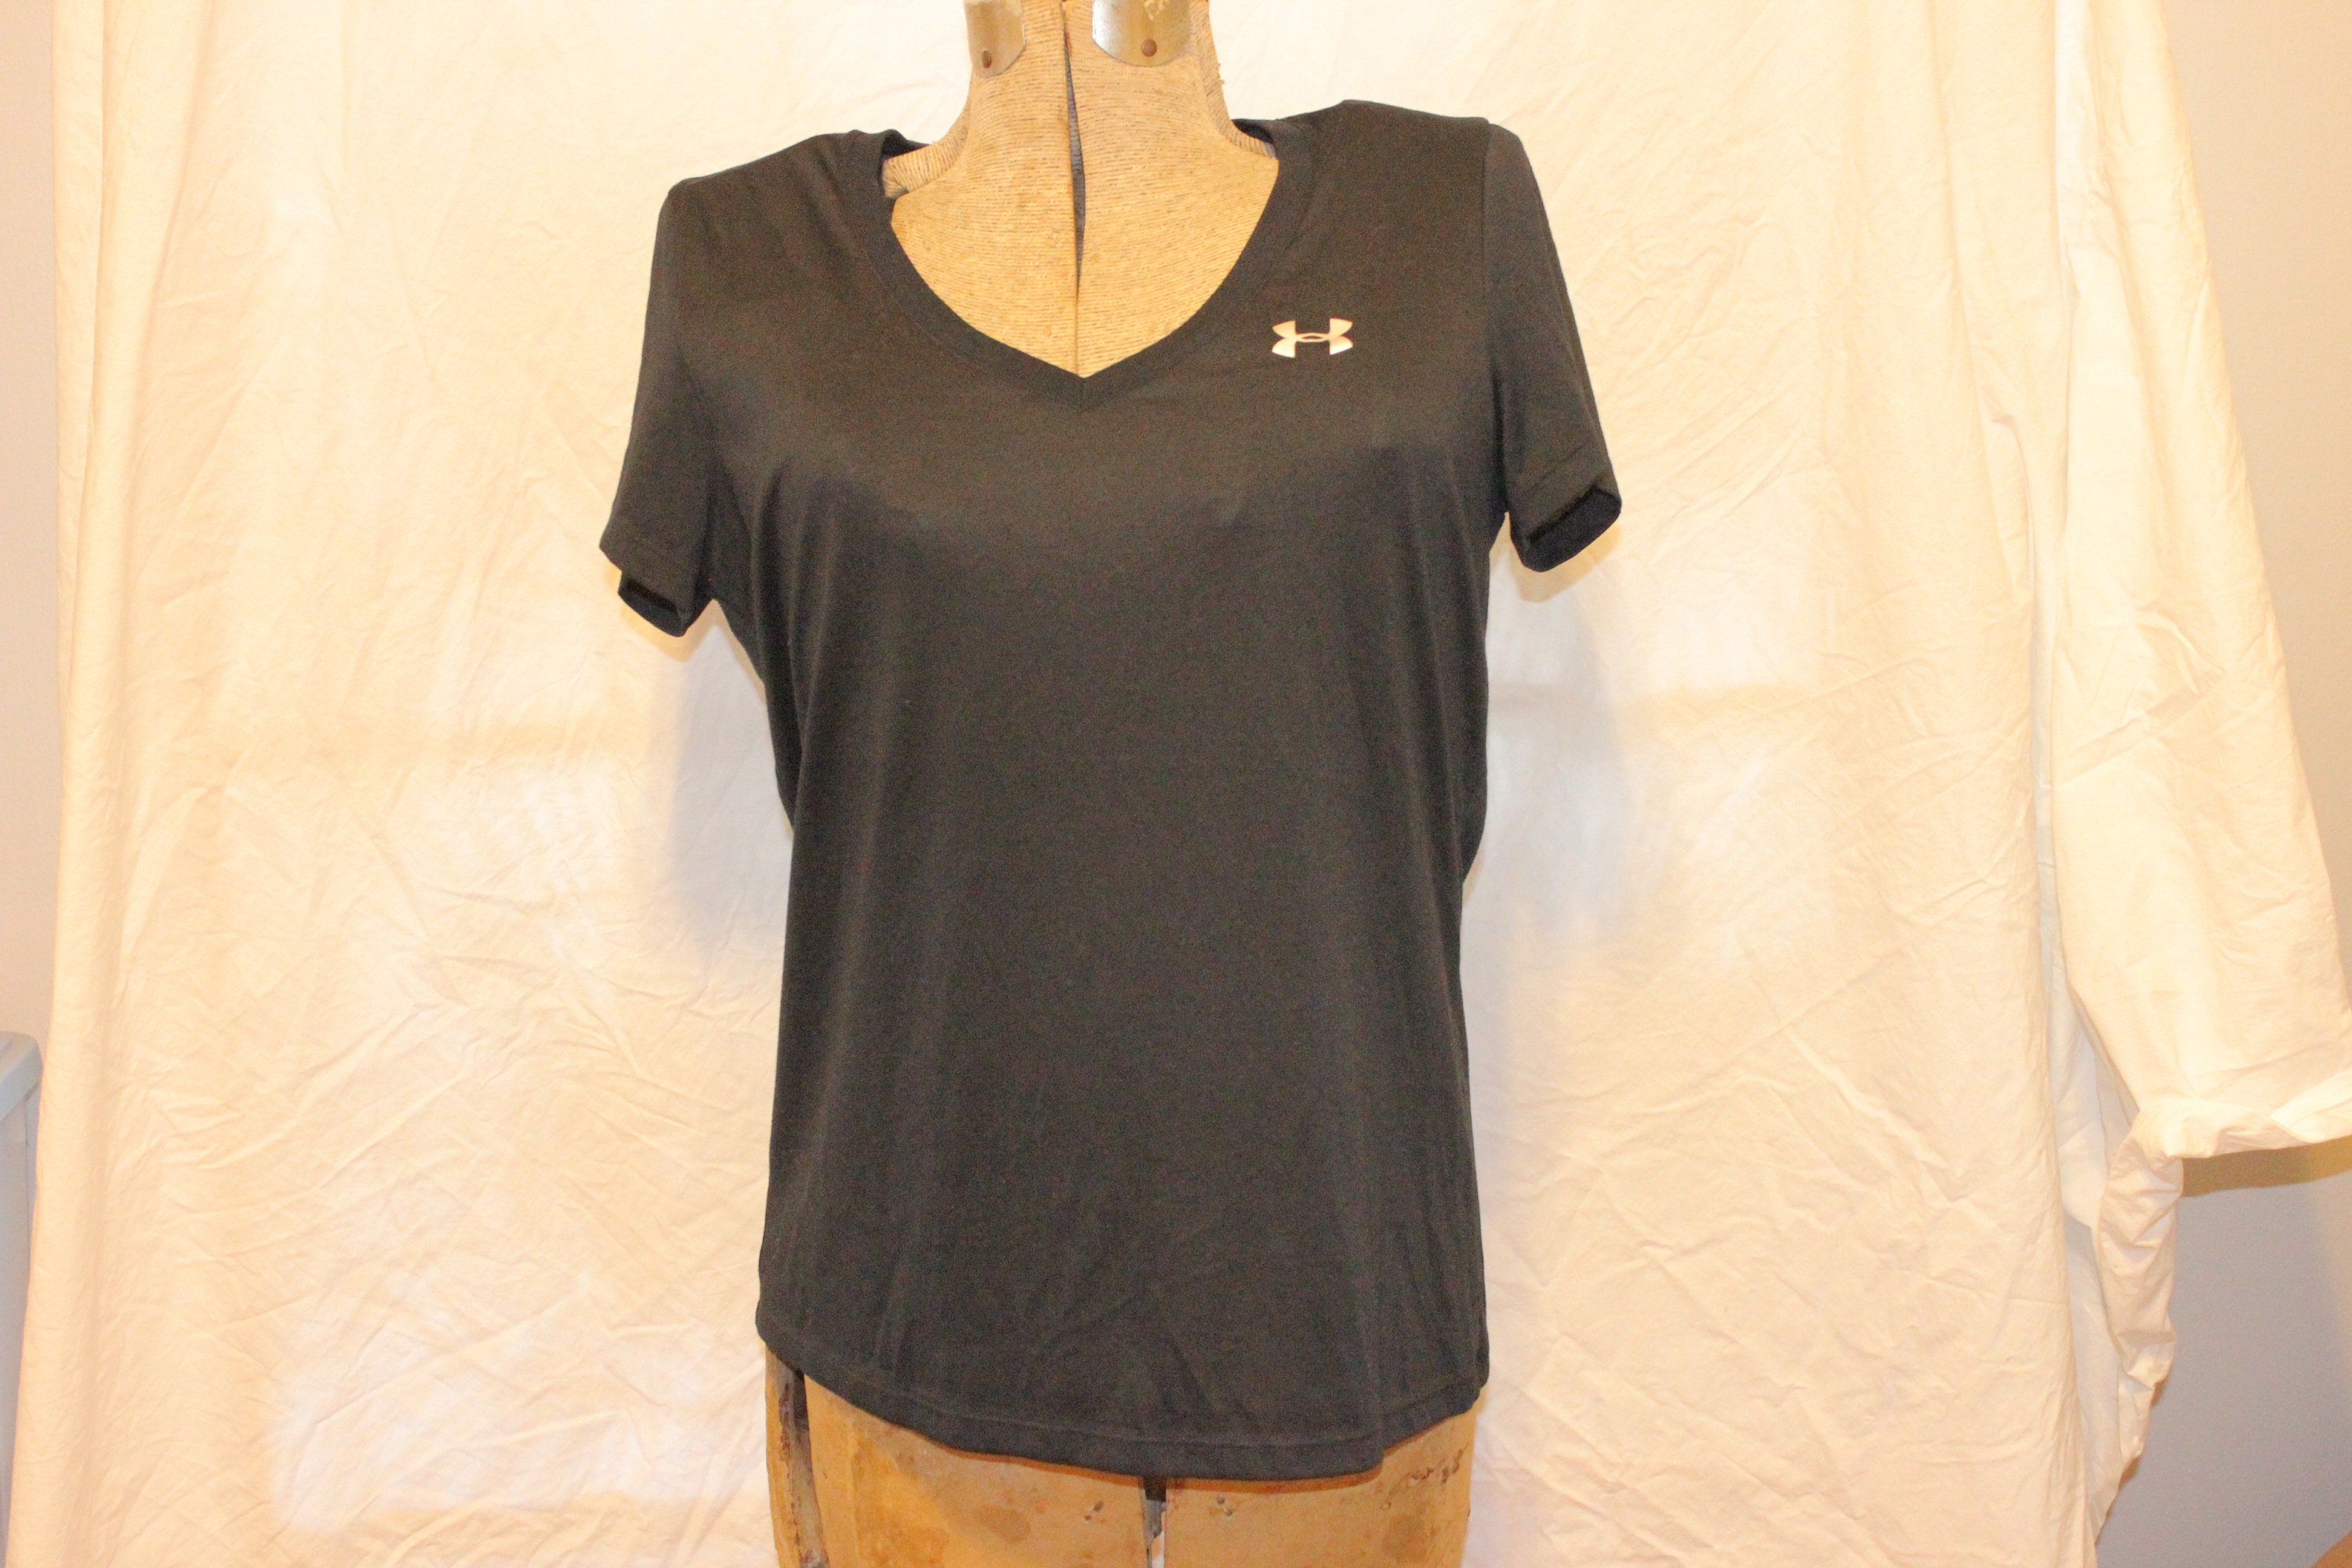 UNDER ARMOUR WOMENS Shirts,under Armour Classic Tee Womens,under Armour  Ladies Tops,under Armour Female Shirts,under Armour Womens T Shirts 